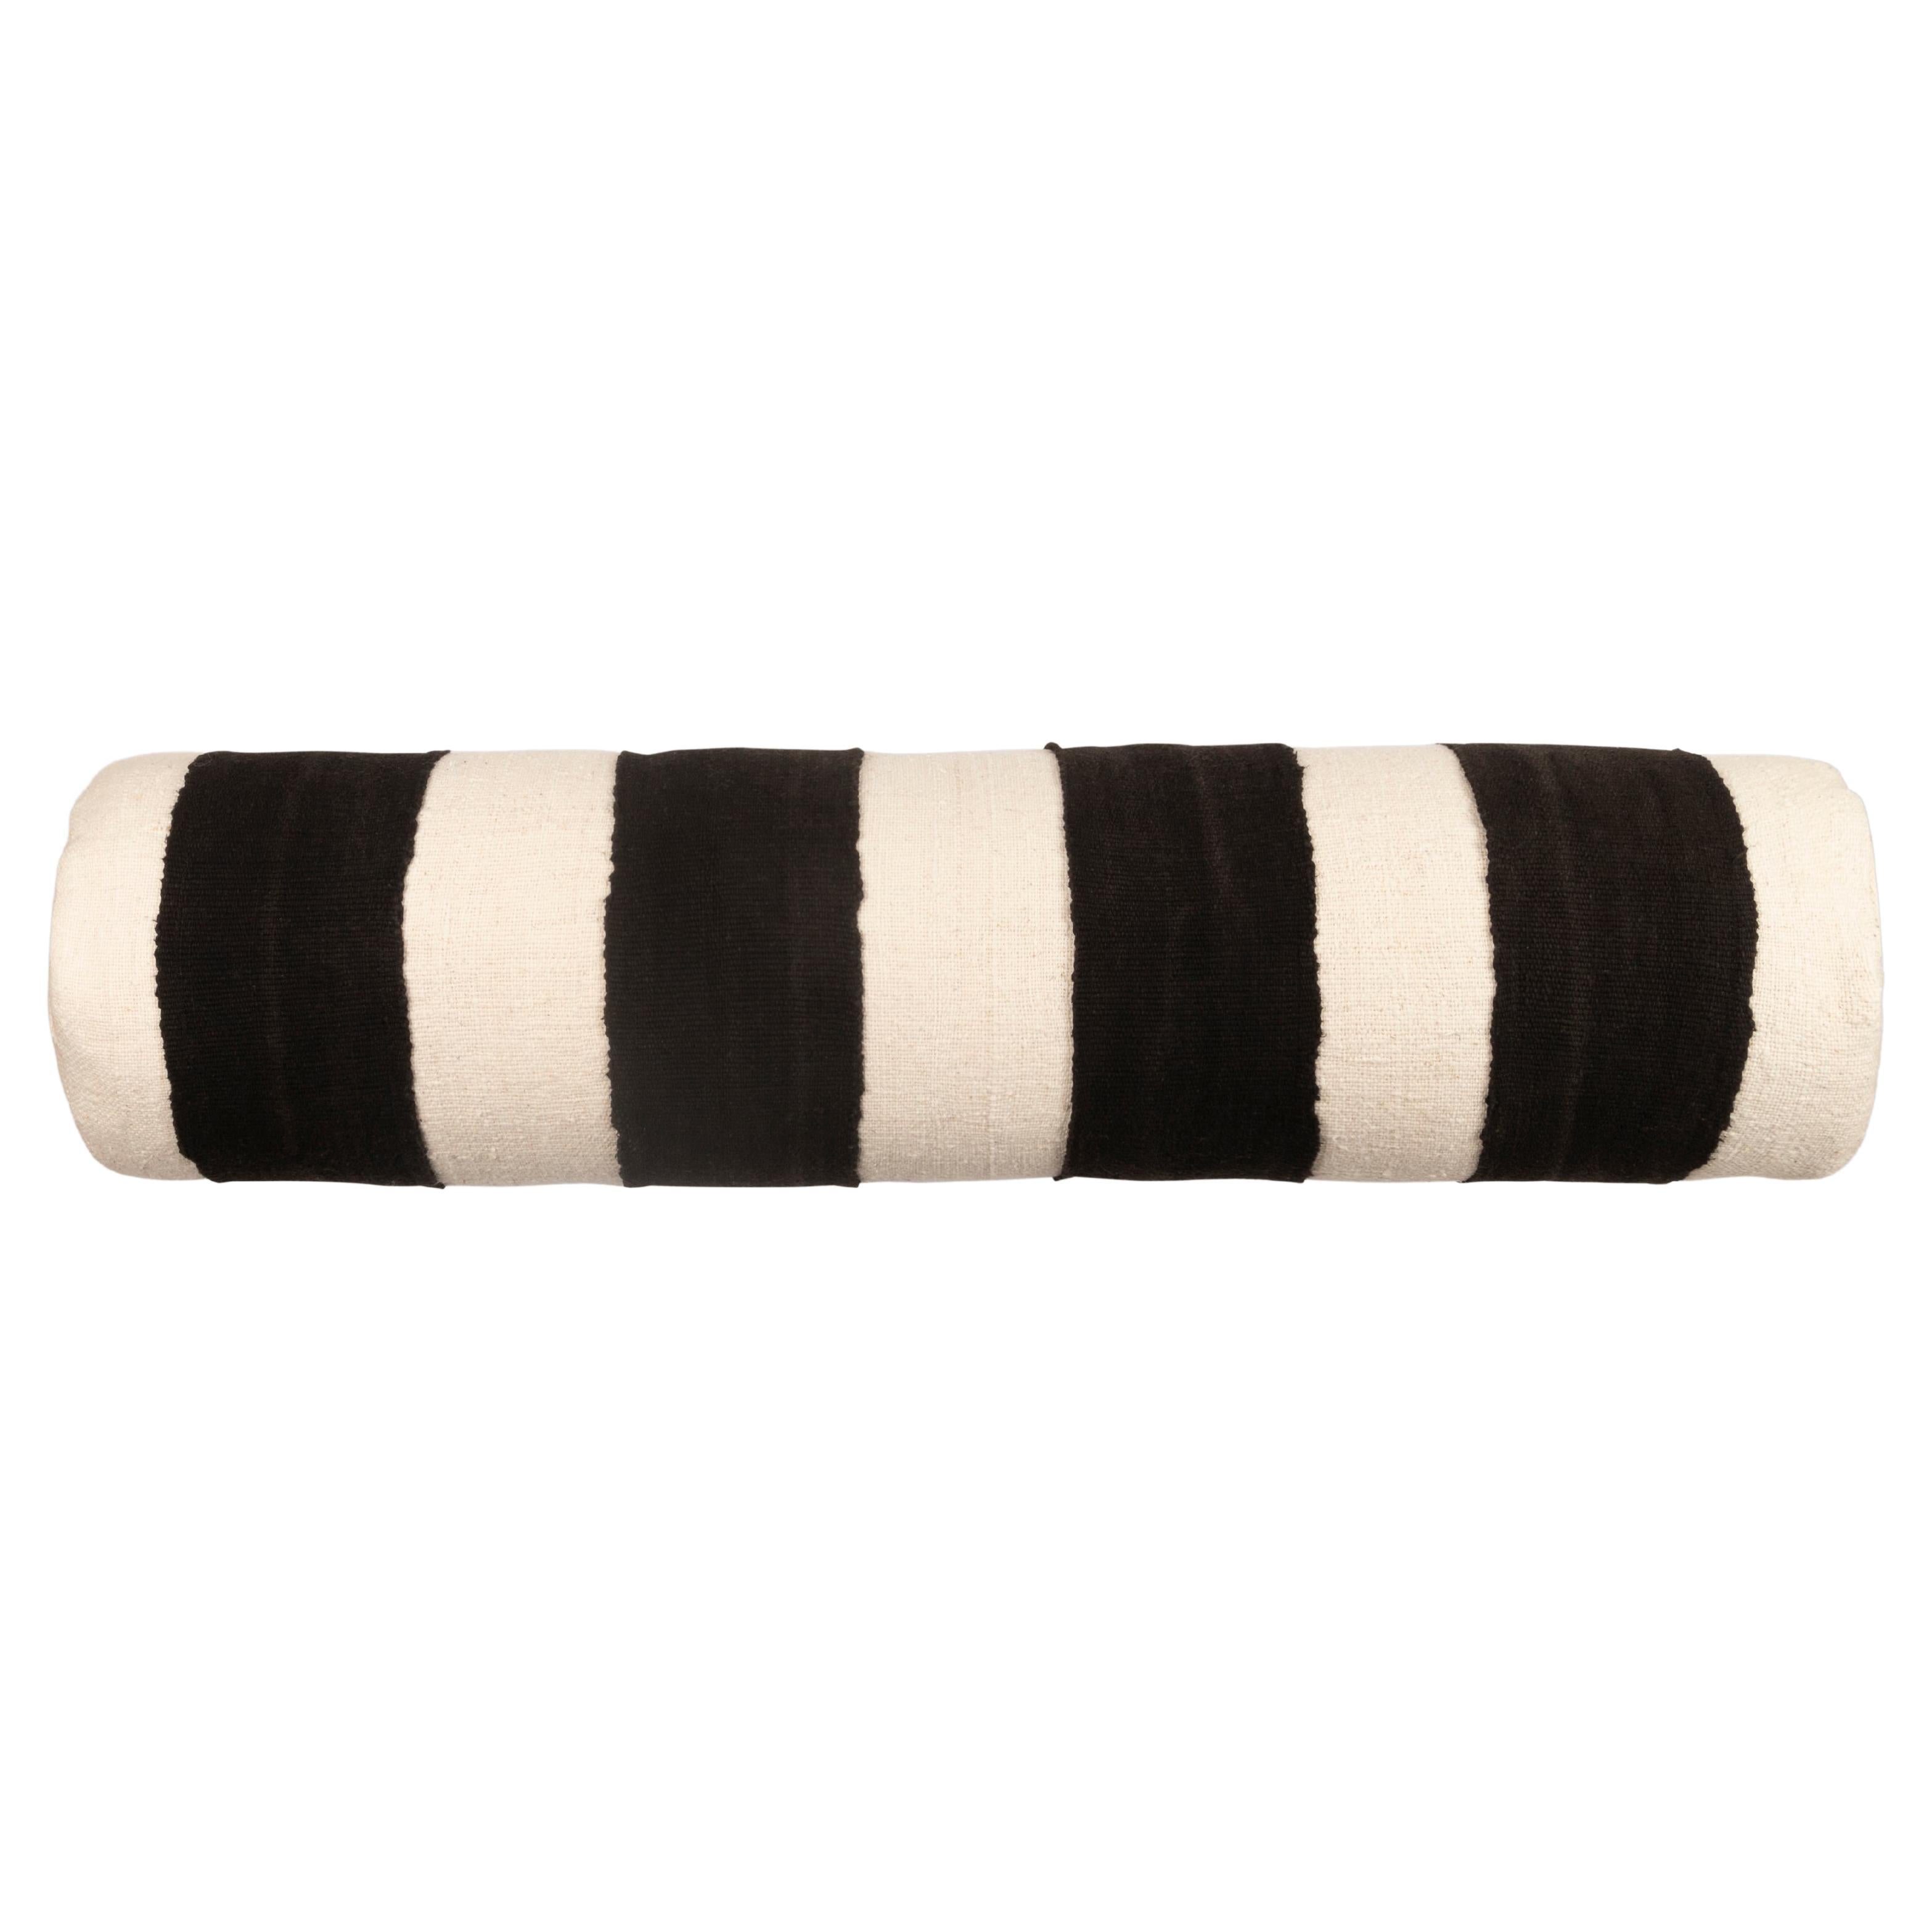 Contemporary Black & White Handwoven Cushion / Bolster for on Your Bed or Sofa For Sale